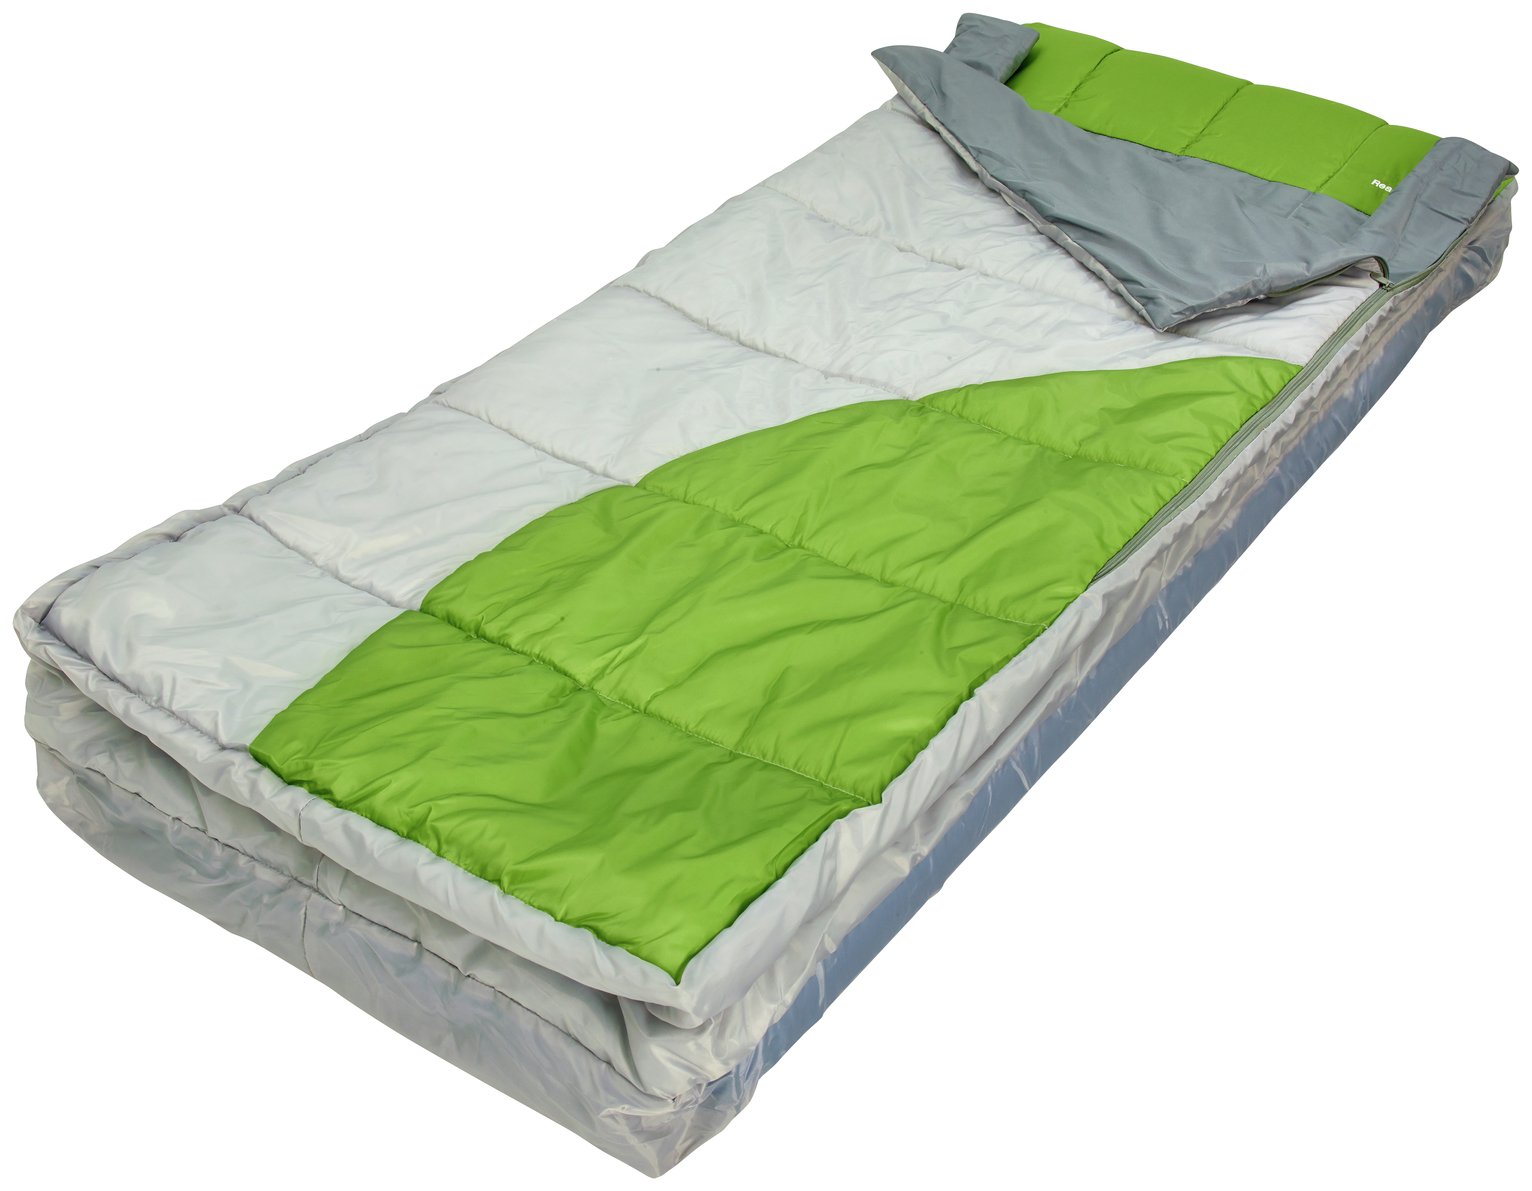 ReadyBed Single Inflatable Camping Air Bed and Sleeping Bag